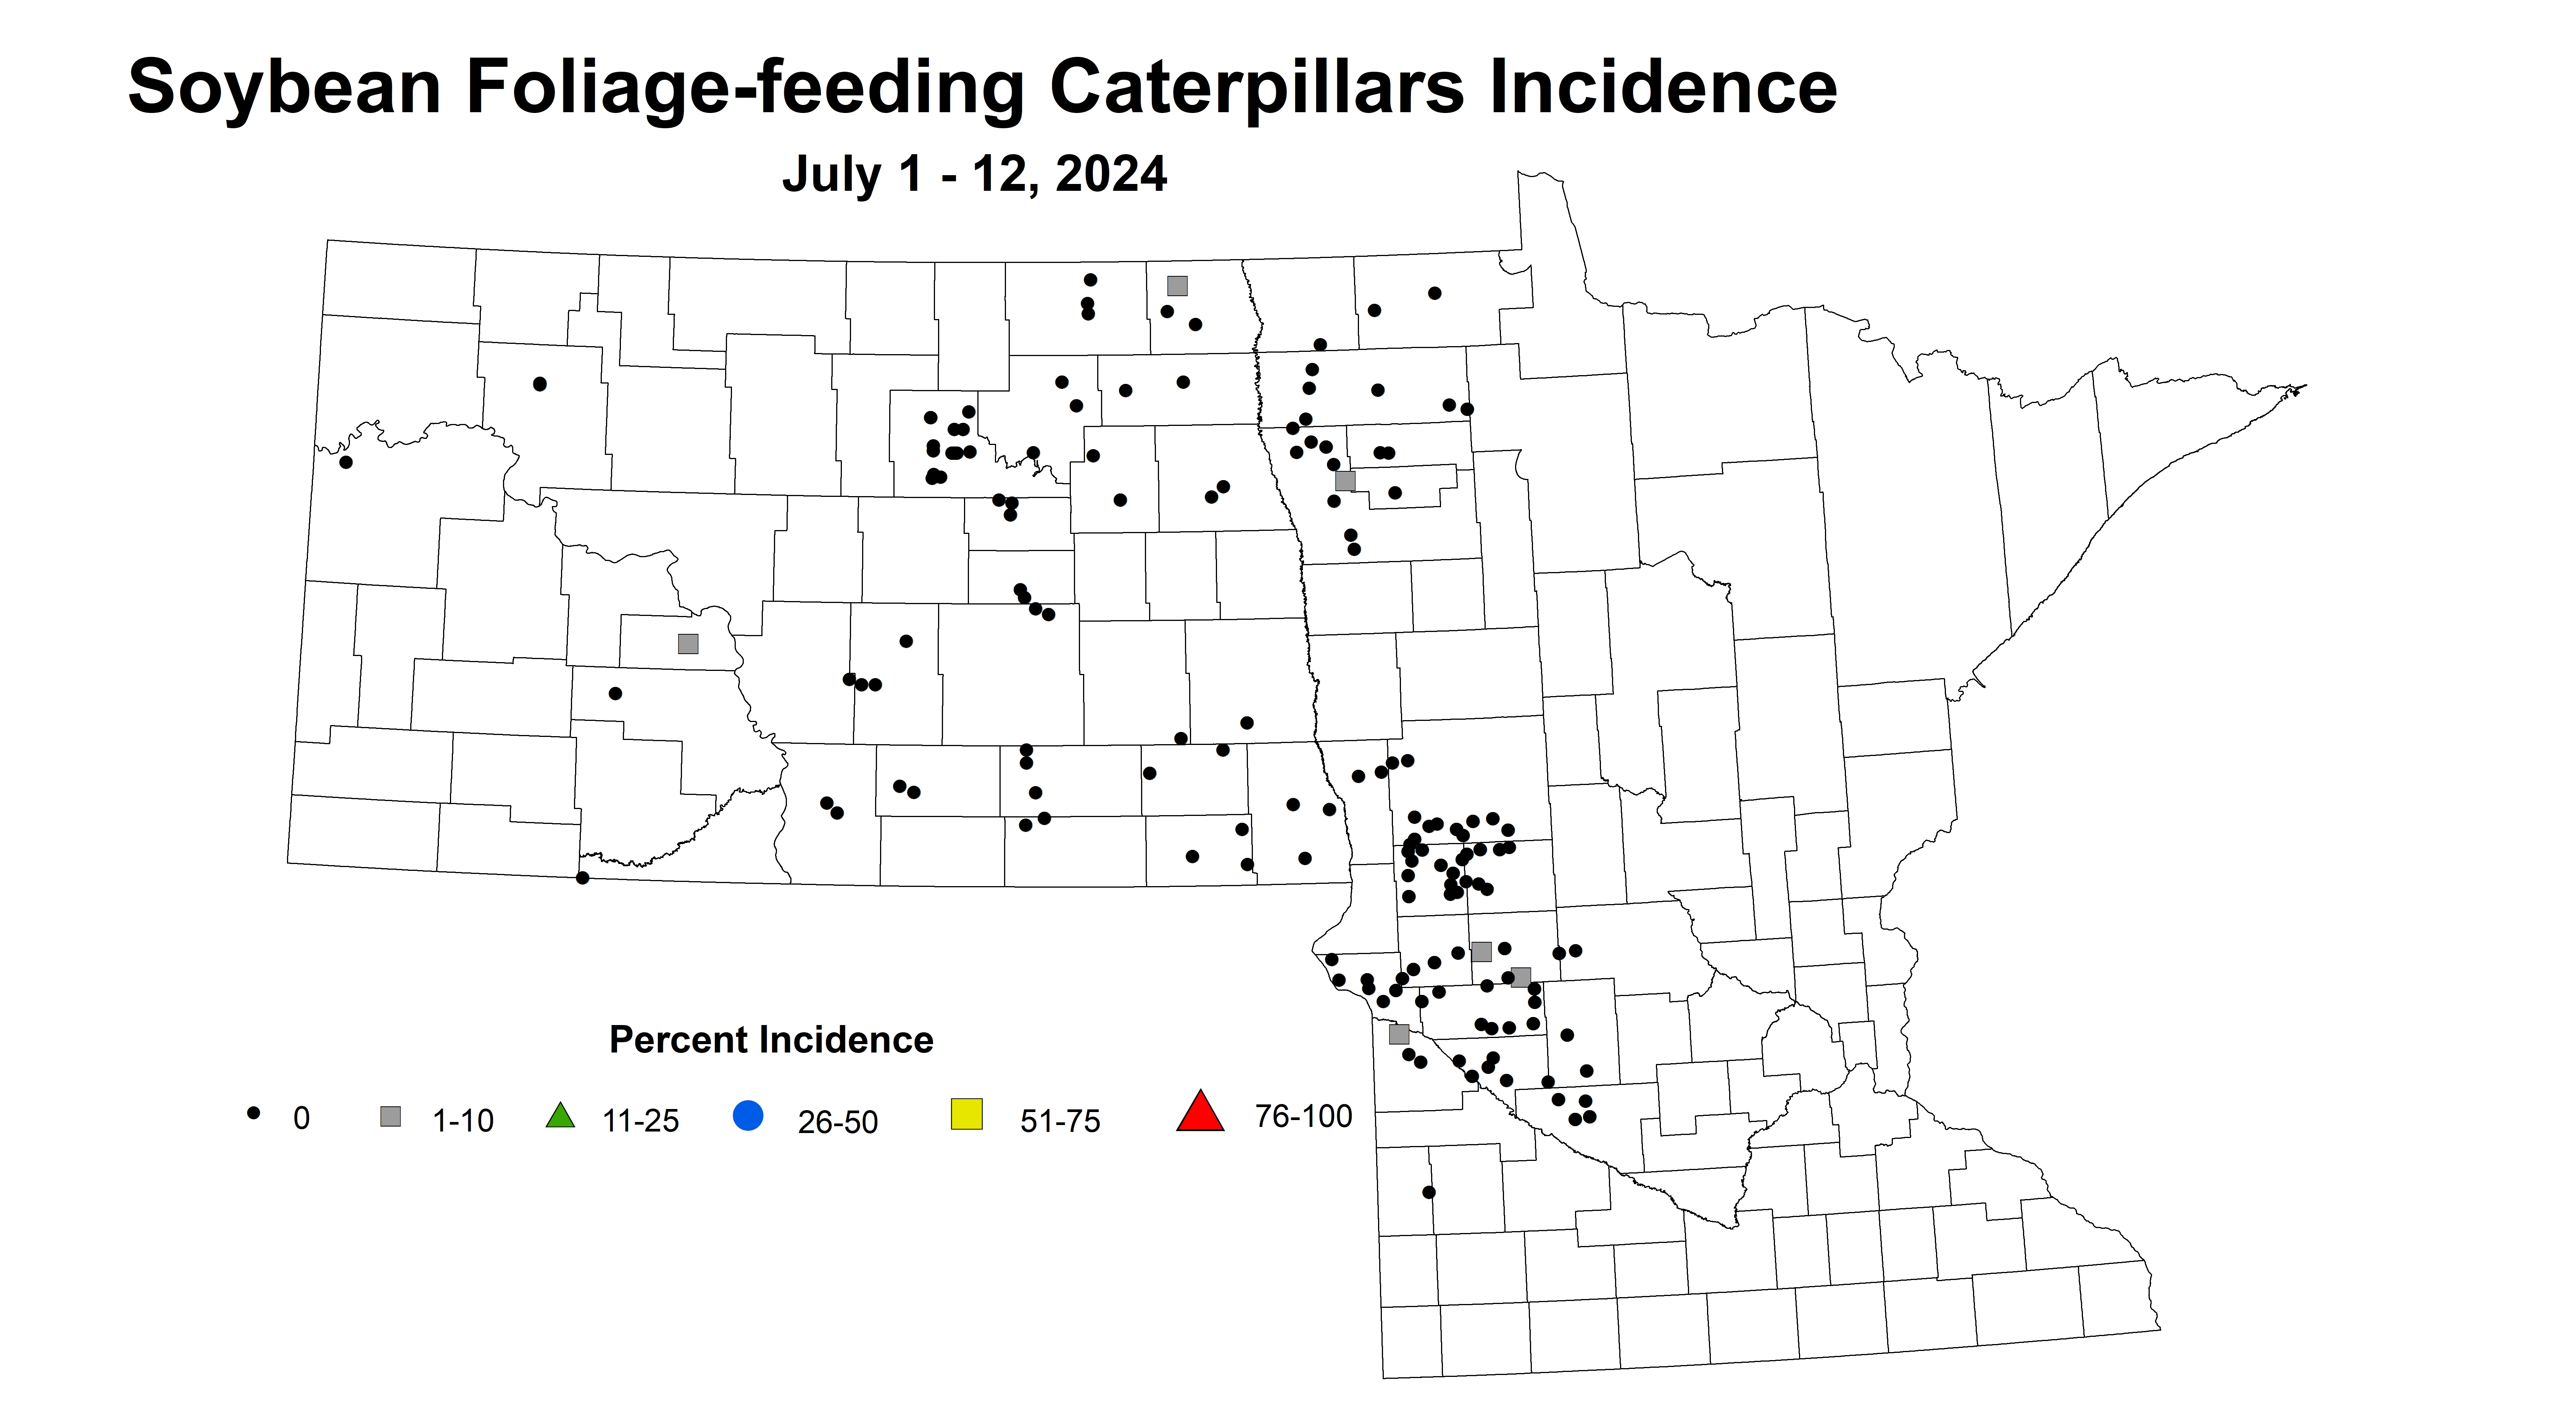 Soybean Caterpillars Incidence July 1-12 2024